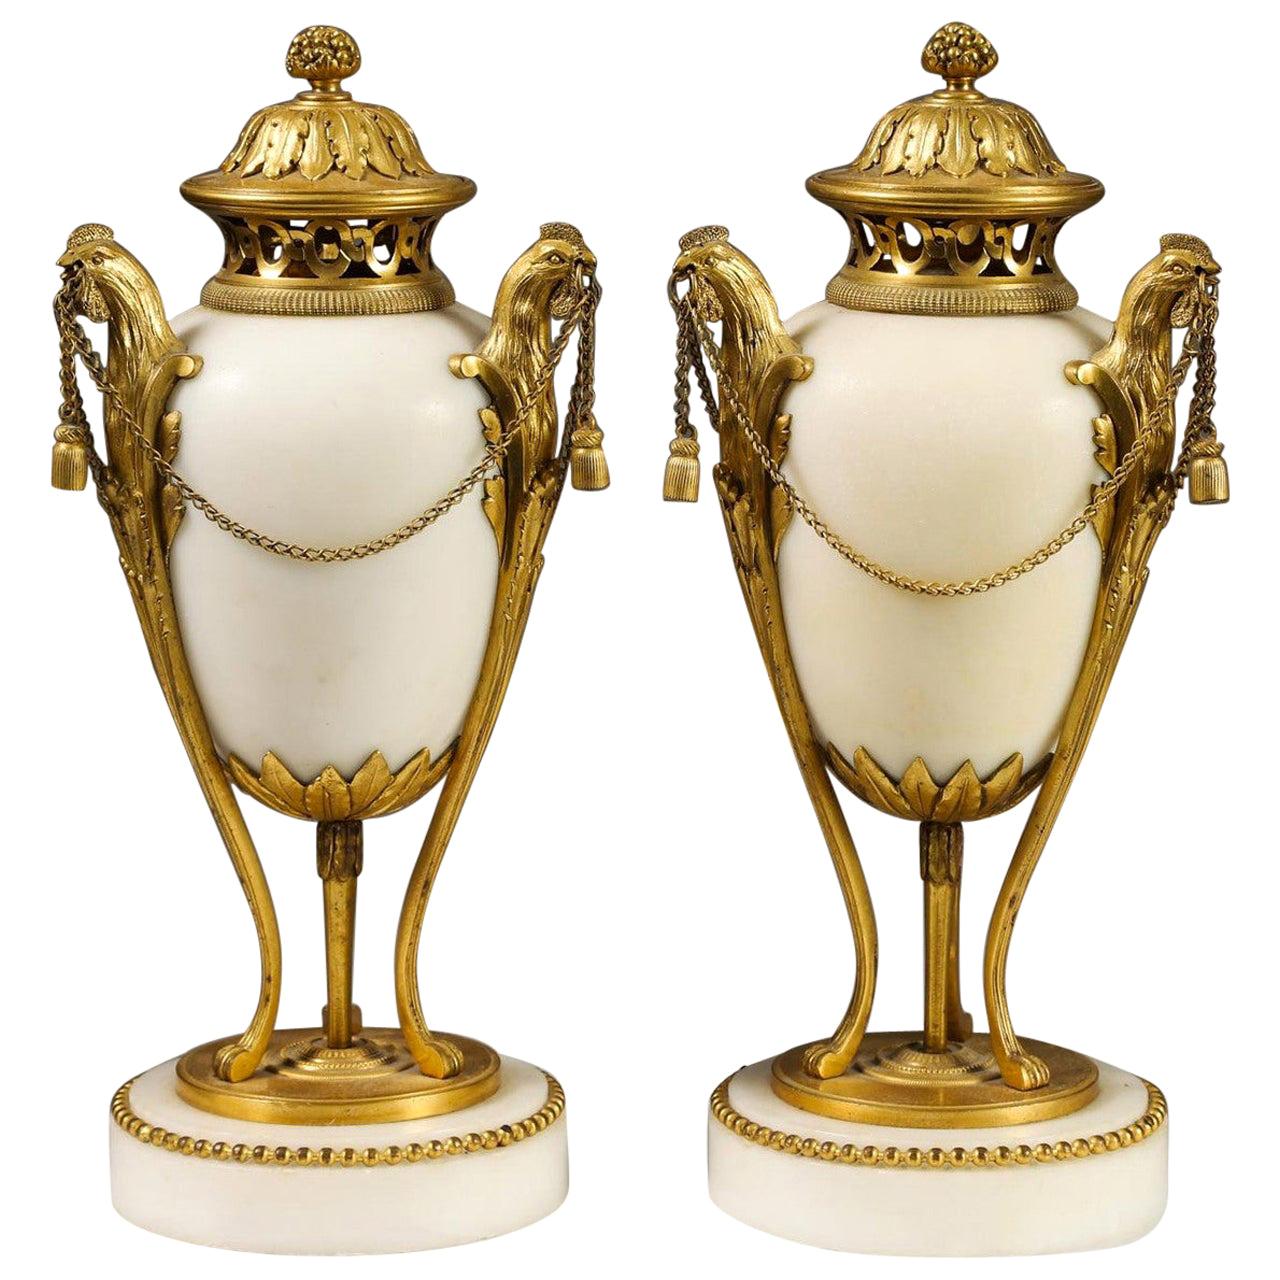 Very Fine Pair of Gilded Bronze and White Marble Covered Urns For Sale